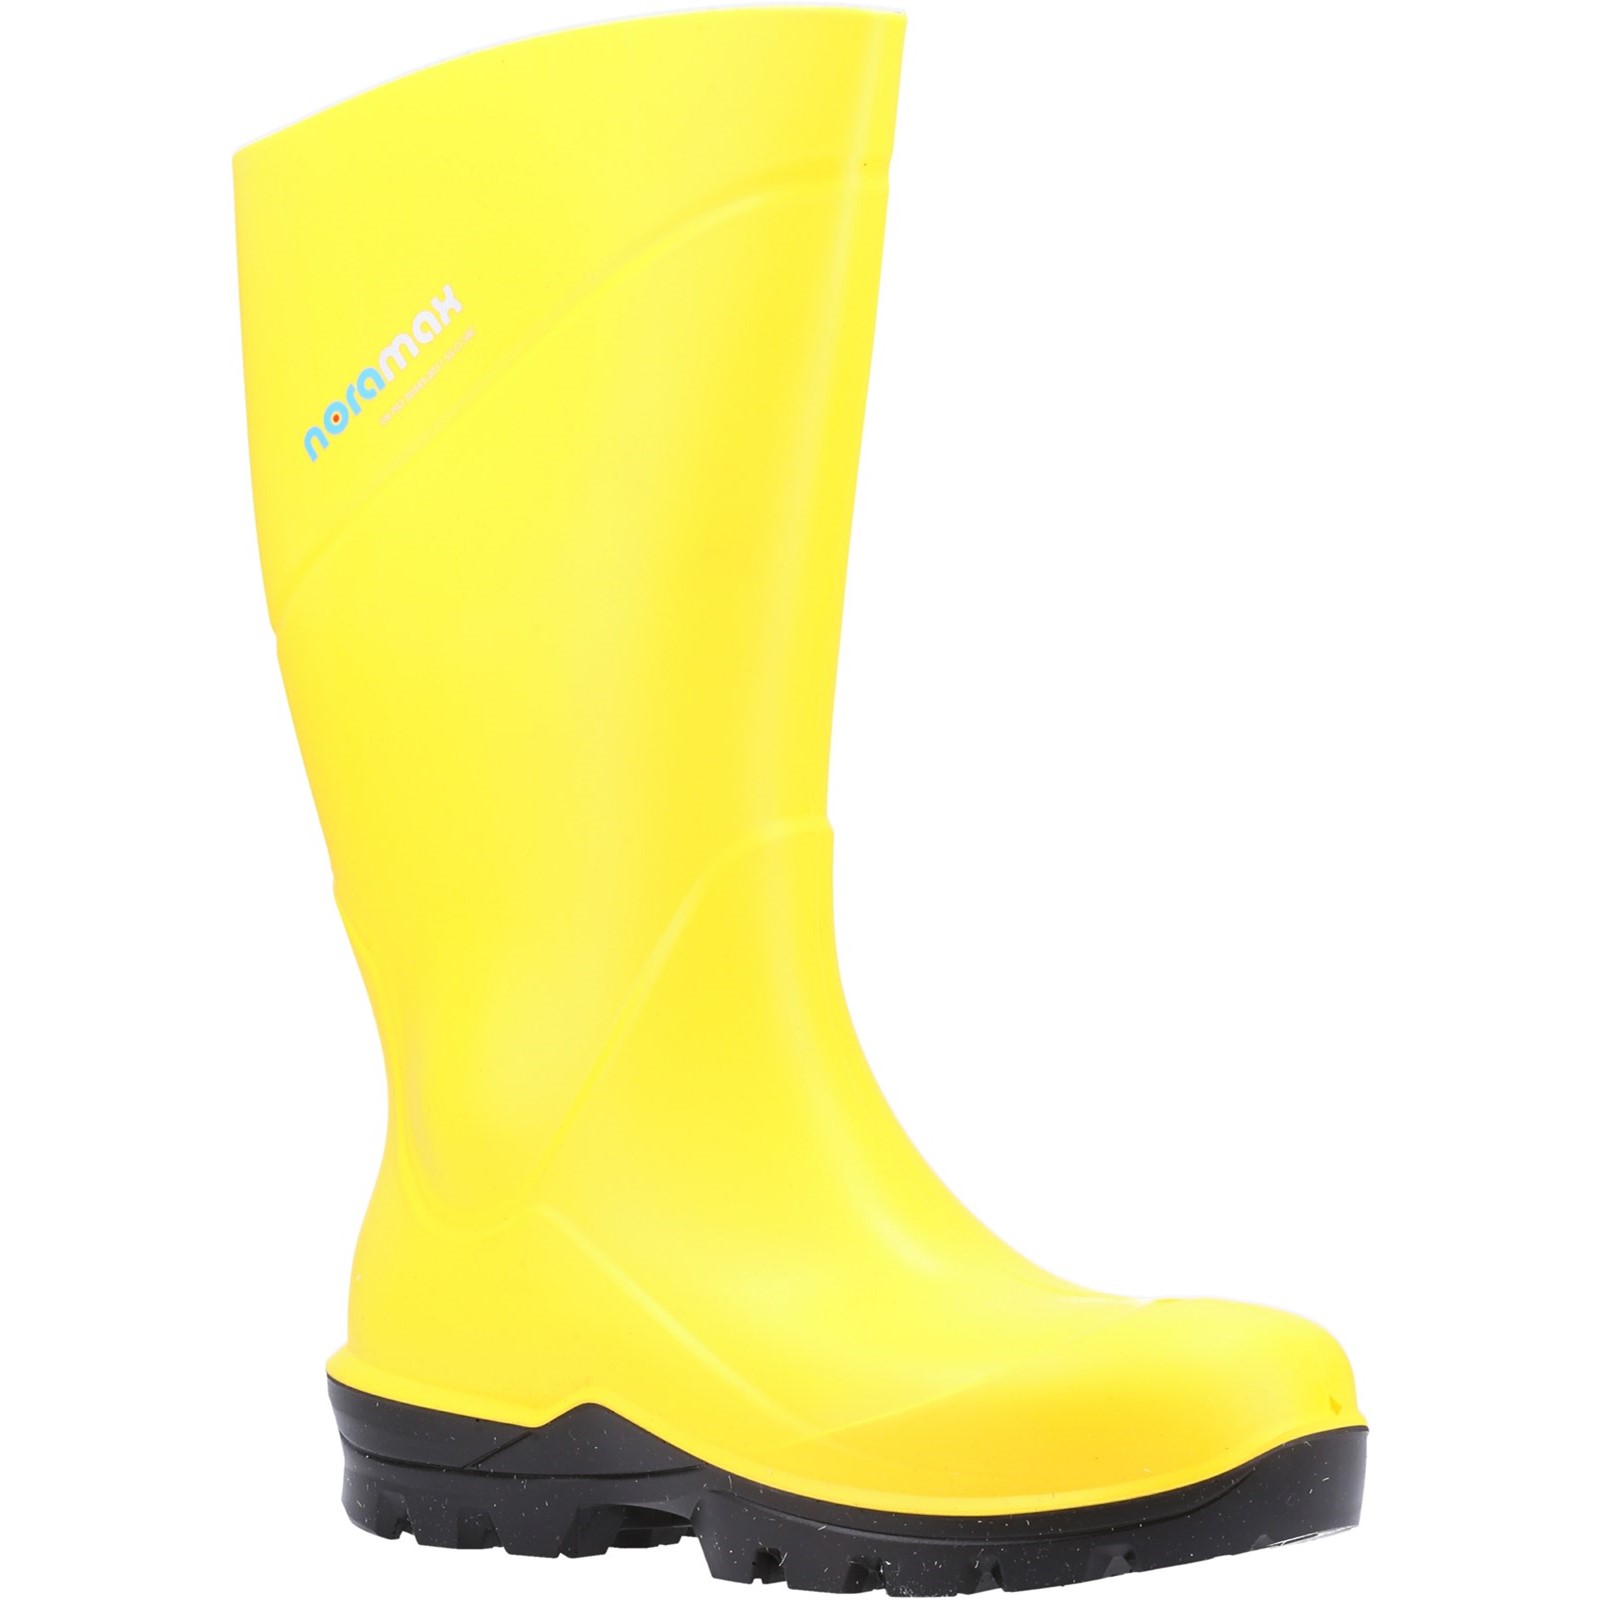 Noramax Pro S5 Full Safety Polyurethane Boot